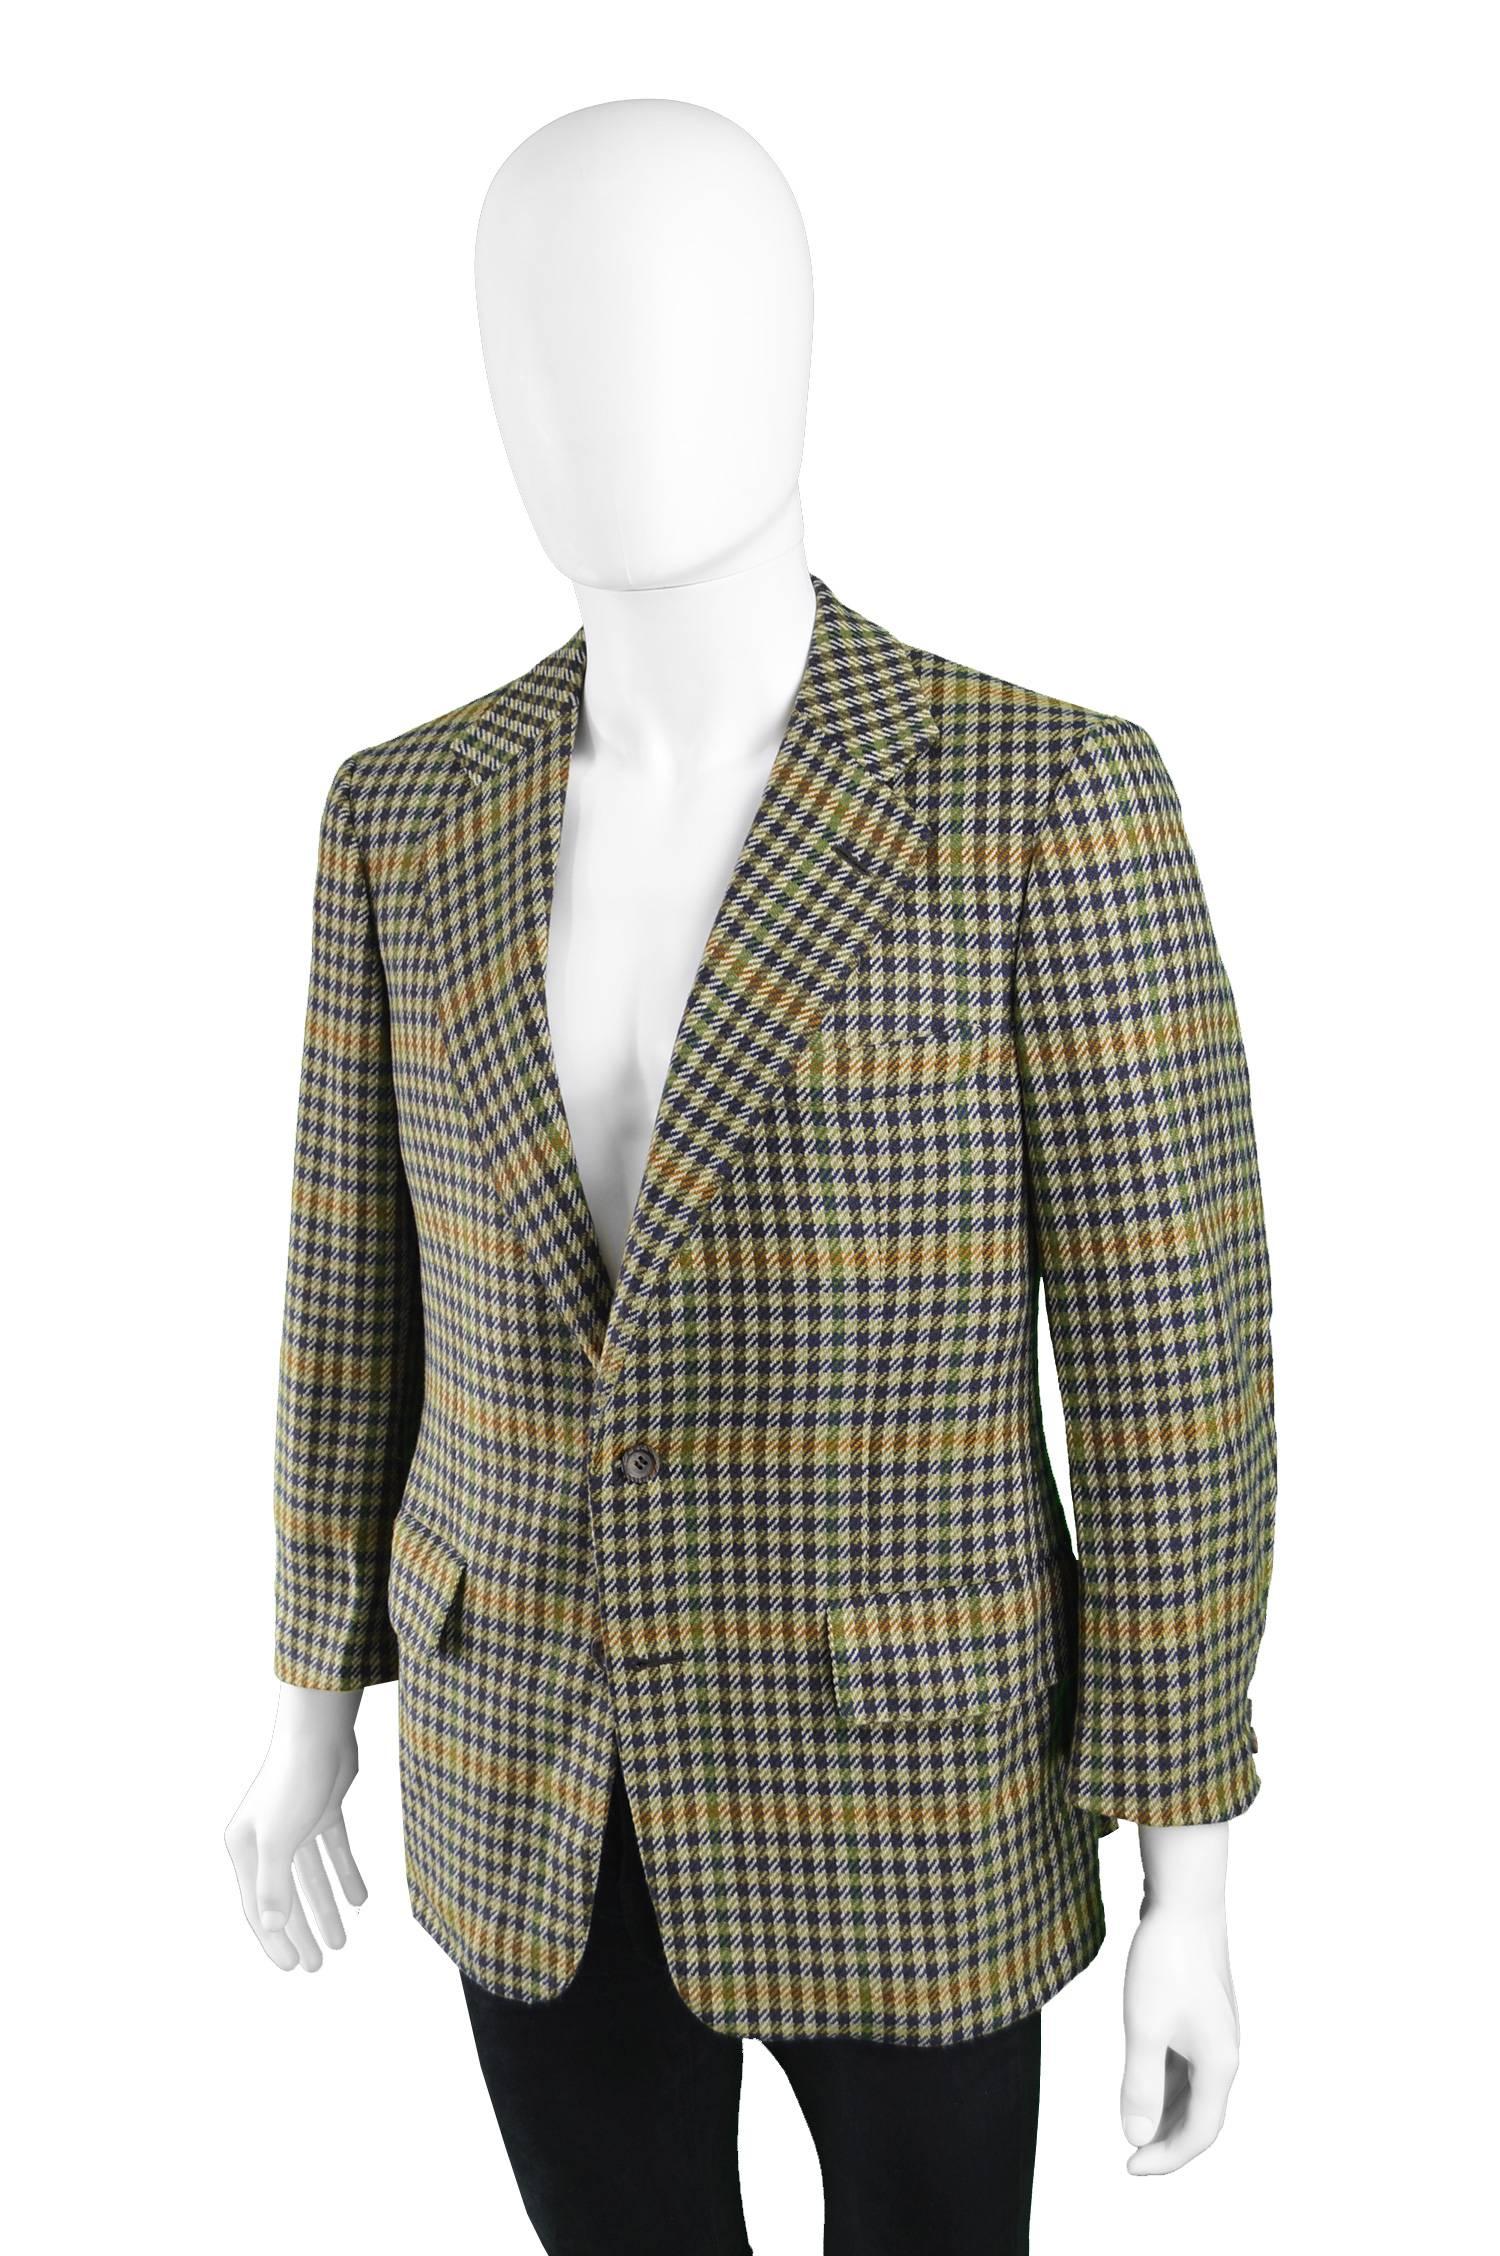 Chester Barrie for Harrods Men's Vintage Pure Cashmere Checked Jacket, 1970s For Sale 1